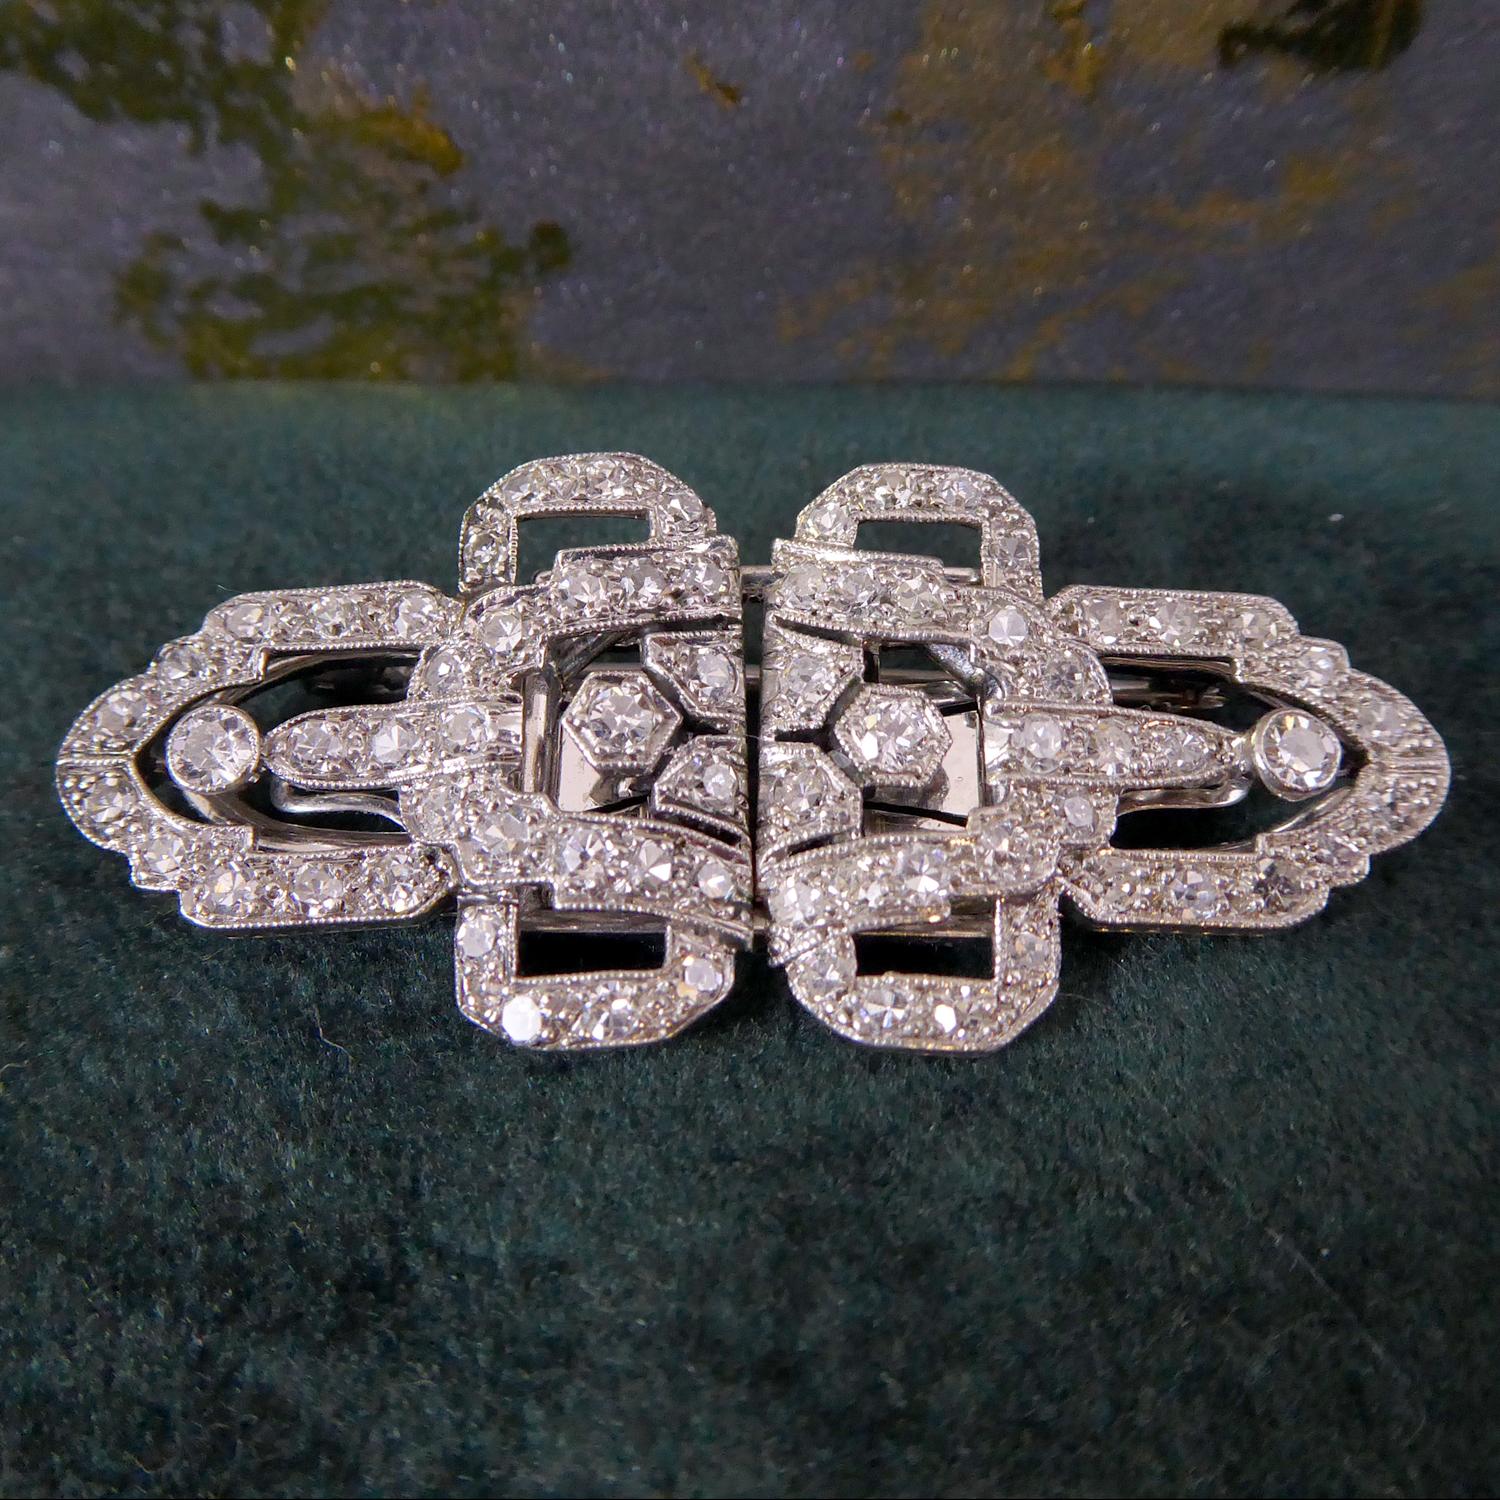 A splendid Art Deco diamond brooch being a double clip which detaches from its back plate so that it can also be worn as a dress clip pinned to either side of the neckline.  I have also worn this as sleeve clips pinned to the cuff of a velvet